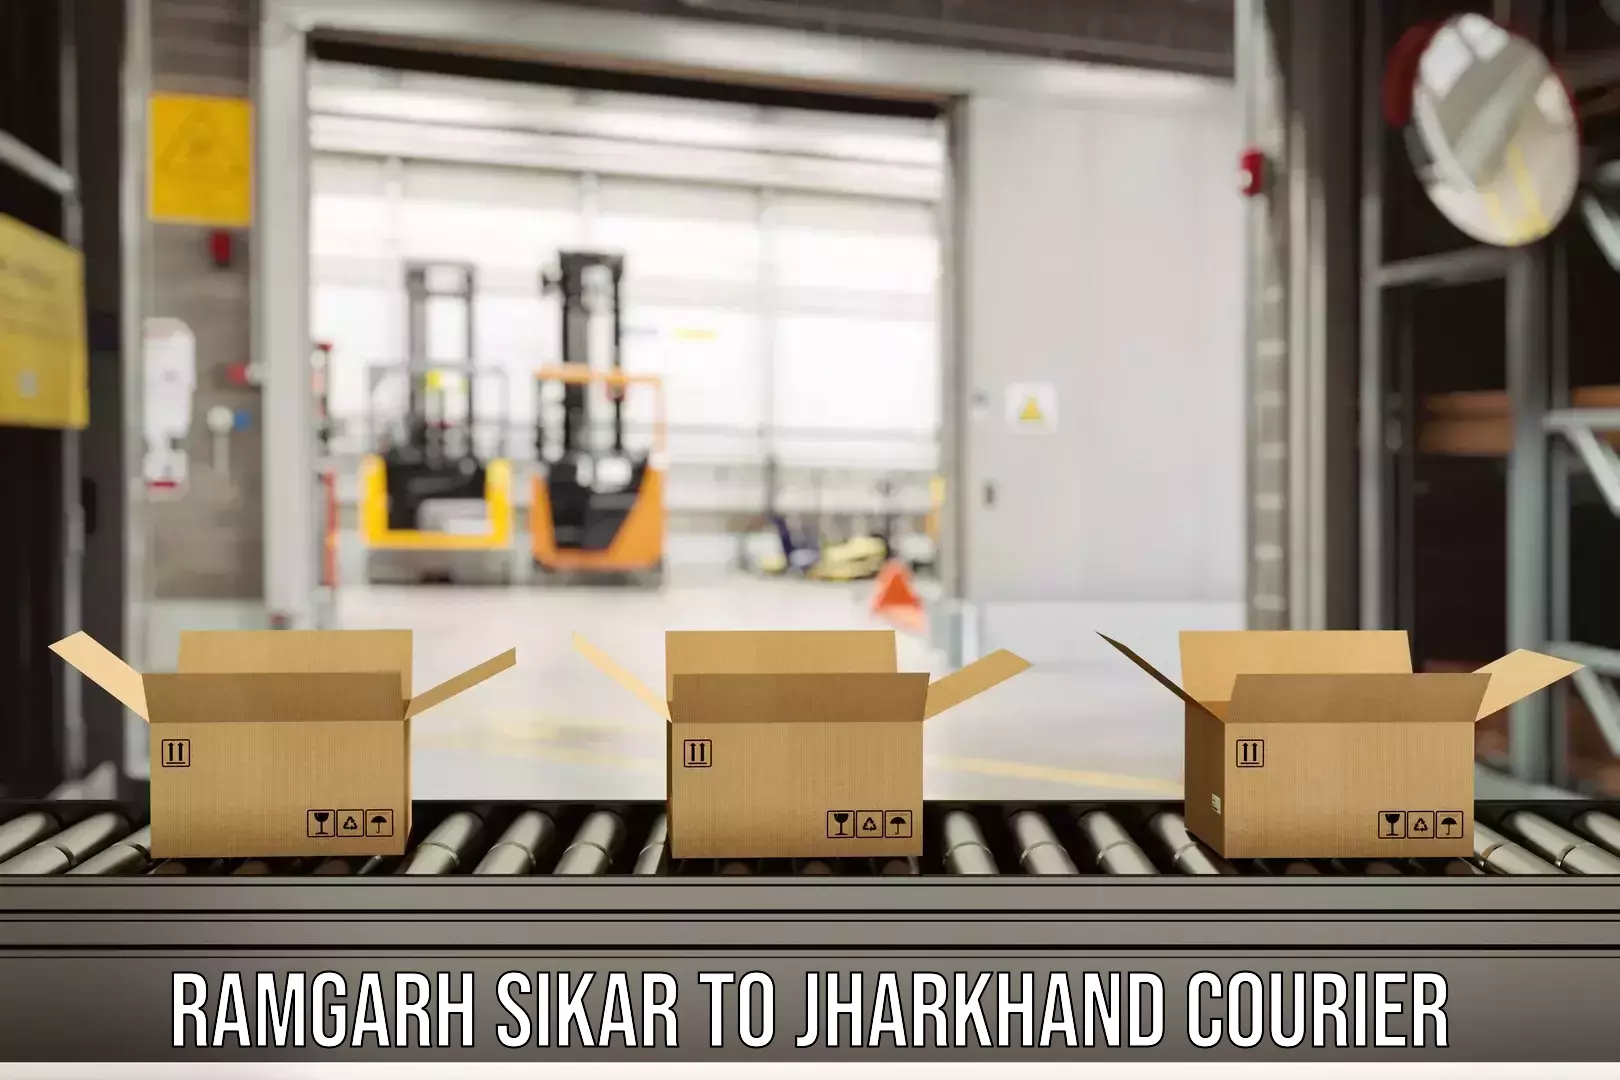 Same-day delivery solutions Ramgarh Sikar to Deoghar